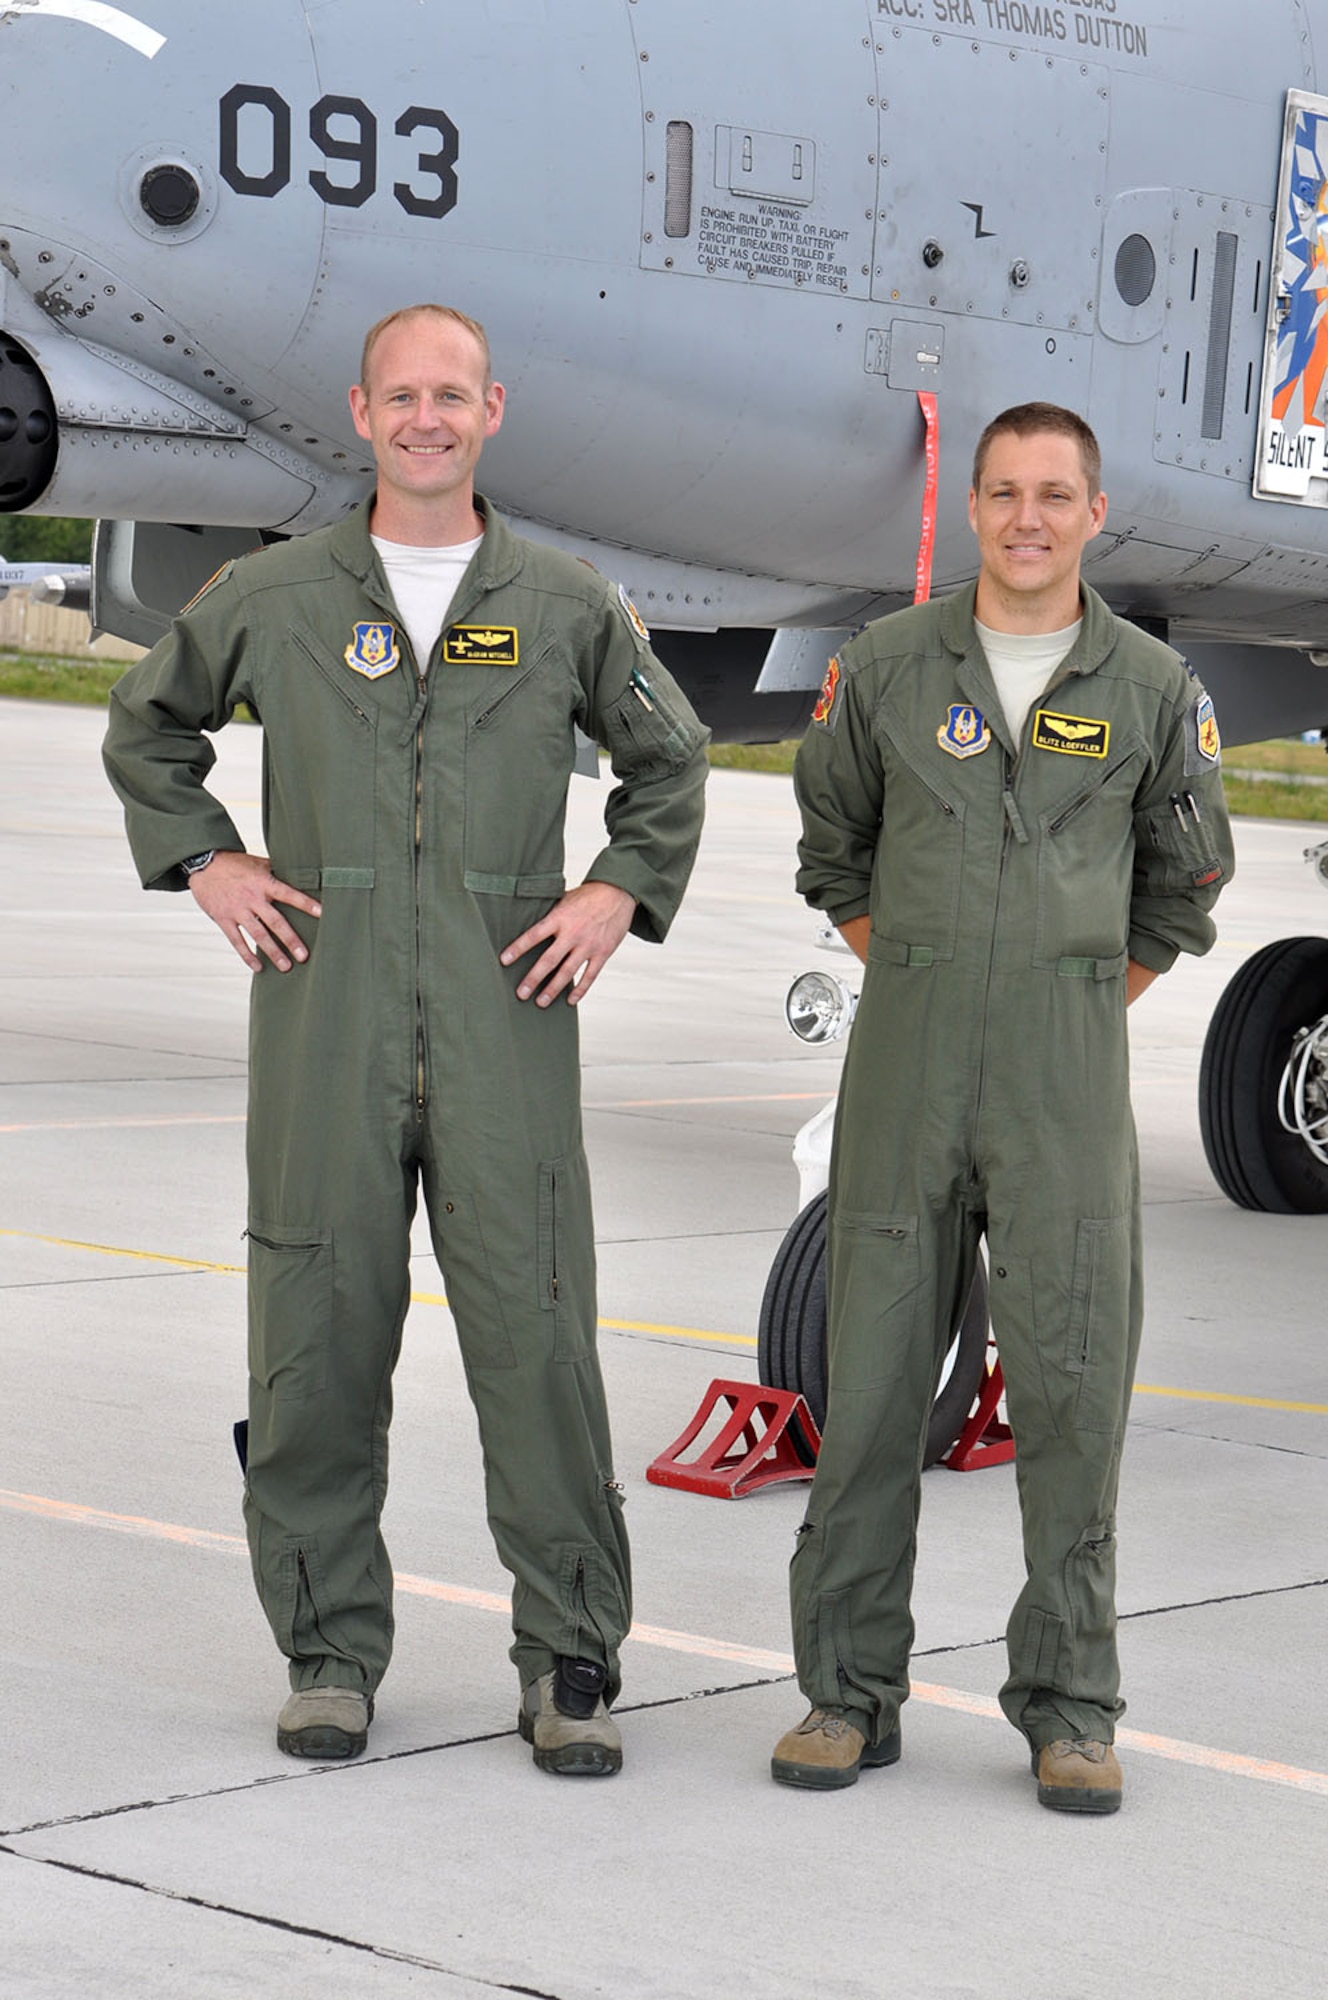 Maj. Rick Mitchell and Capt. Sven Loeffler, both A-10 Thunderbolt II pilots with the 303d Fighter Squadron, 442d Fighter Wing out of Whiteman Air Force Base, Mo., made history Aug. 26 at Leilvarde Air Base in Latvia being the first U.S. fighter pilots to land a jet at the airfield. The mission is part of Operation Atlantic Resolve where U.S. forces are partnering with European allies to meet possible future challenges. (U.S. Air Force photo by Capt. Denise Haeussler)